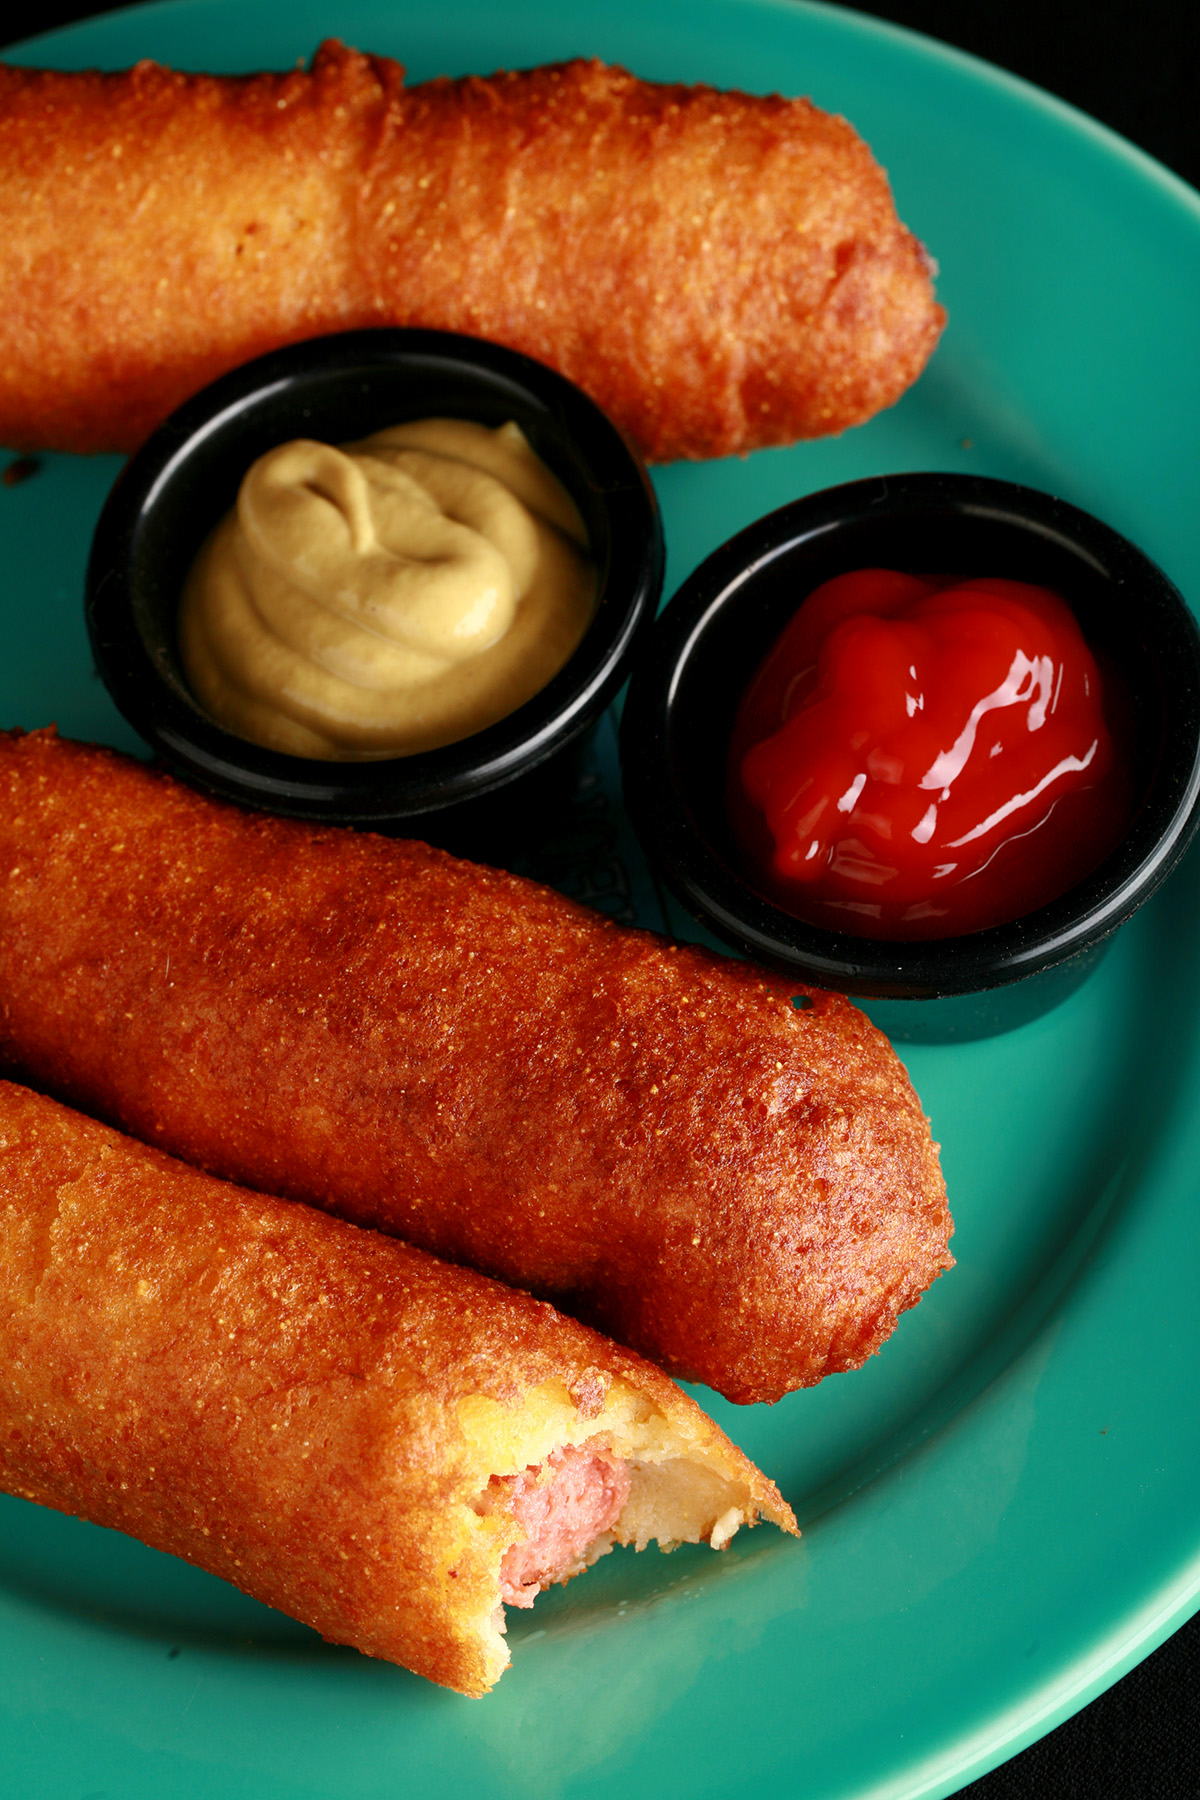 3 gluten-free corn dogs on a green plate, with little bowls of ketchup and mustard.